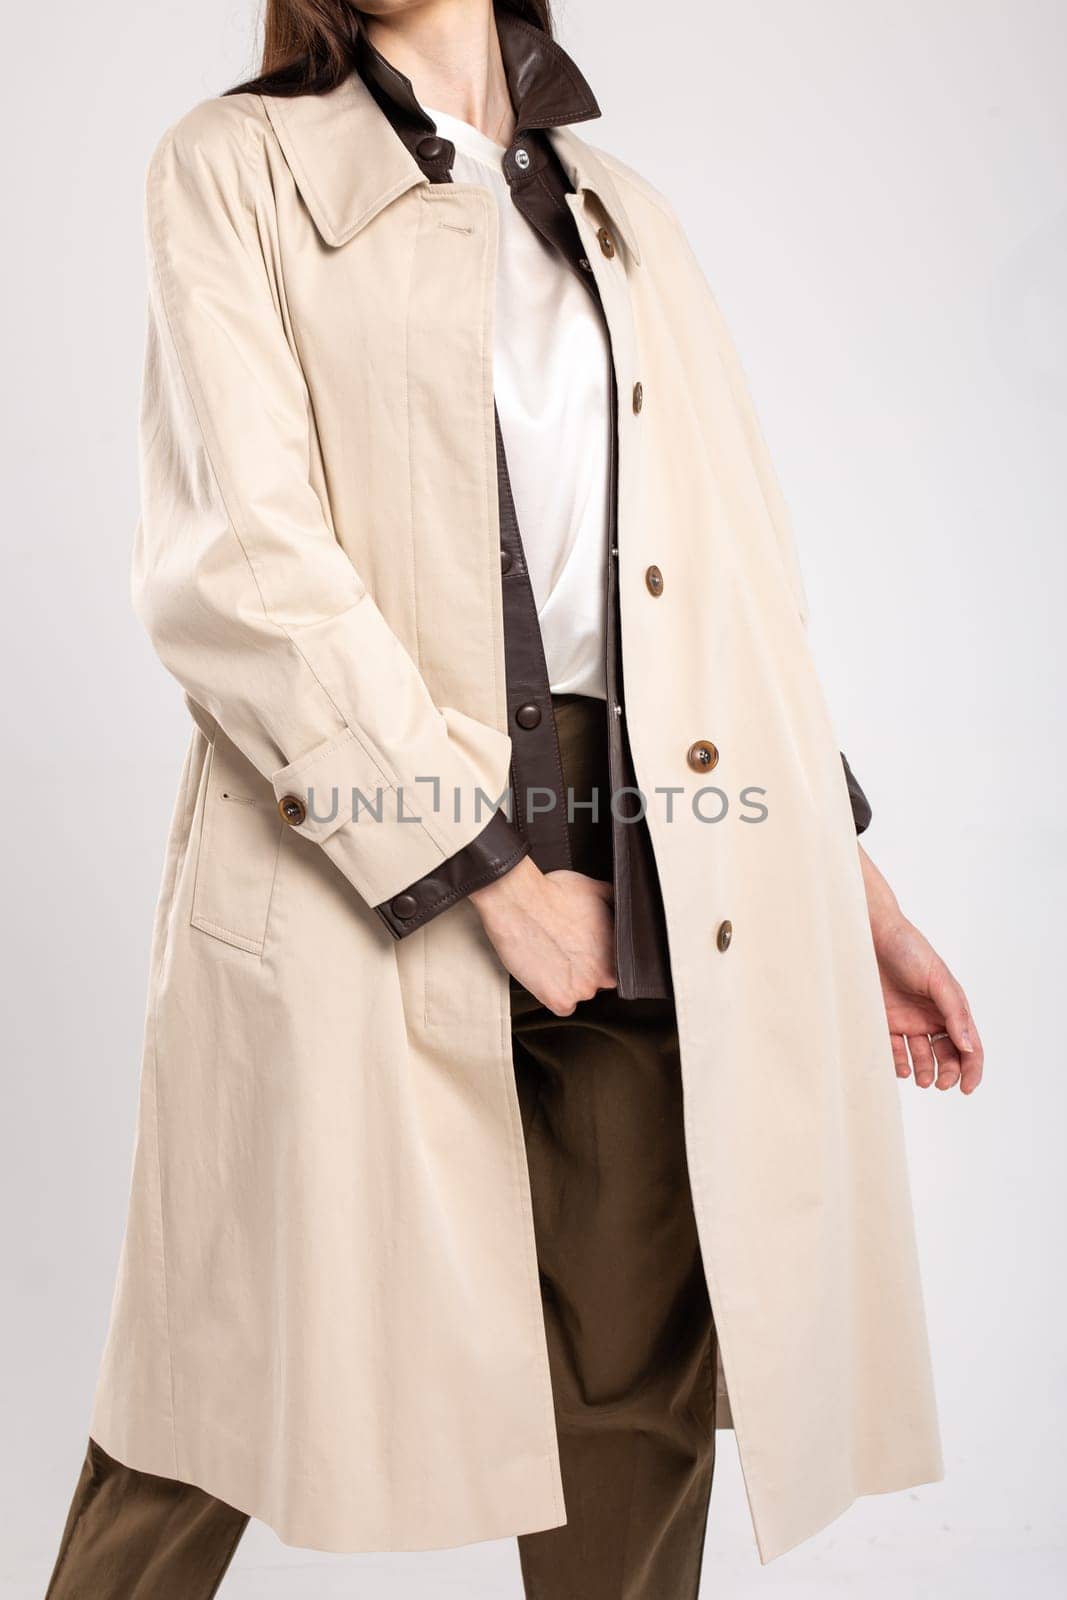 A sophisticated and timeless look for any occasion, this beige trench coat features a sleek and clean design with a hint of luxury.